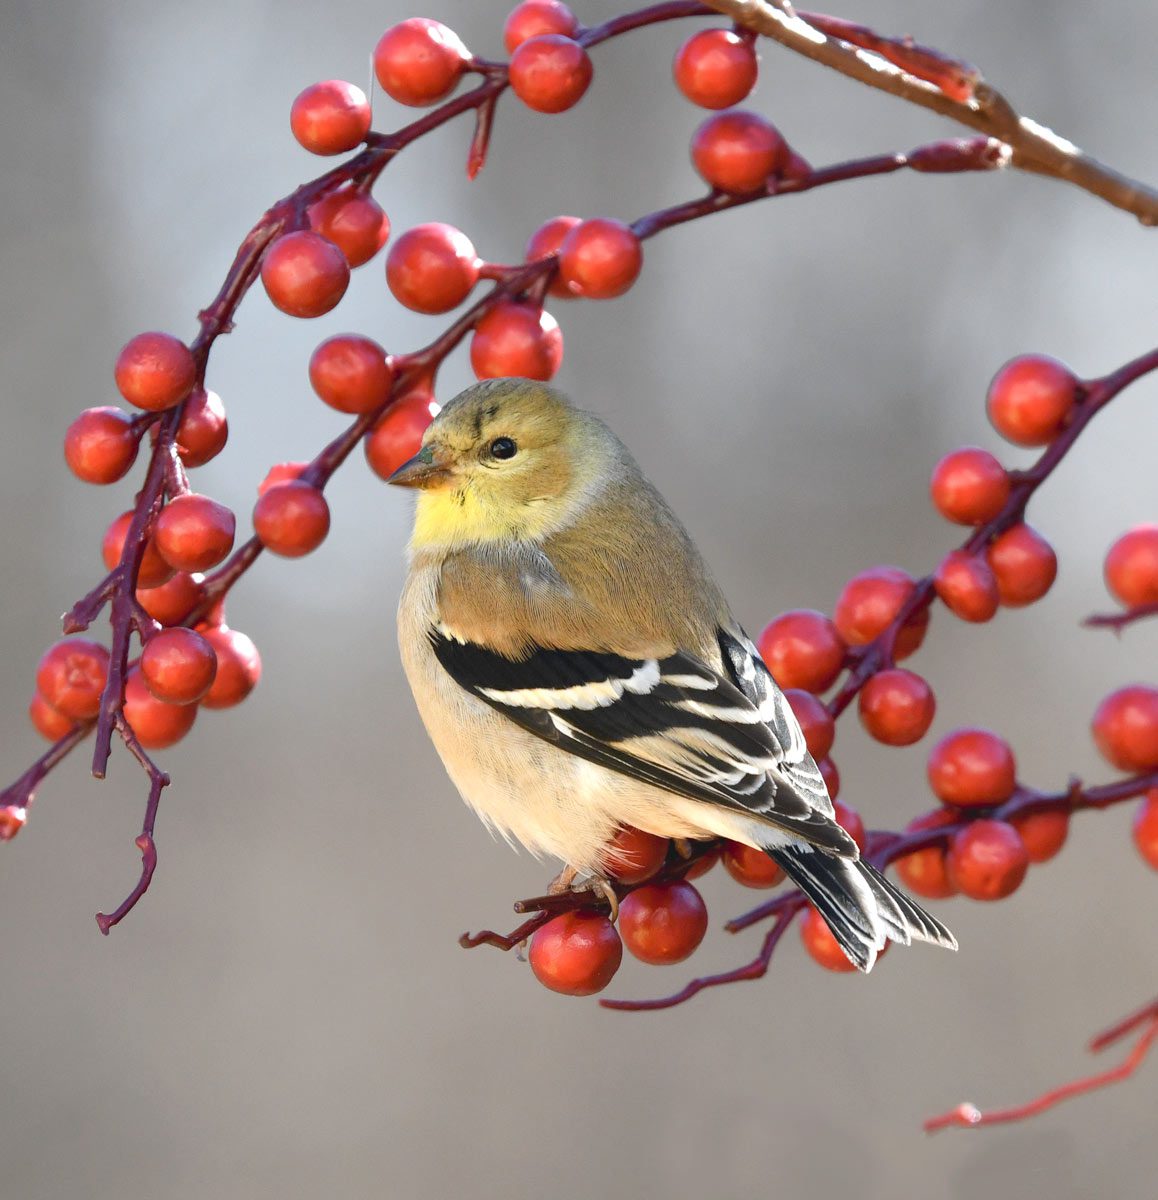 American Goldfinch sitting with berries. Photo by Deborah Bifulco/Macaulay Library.